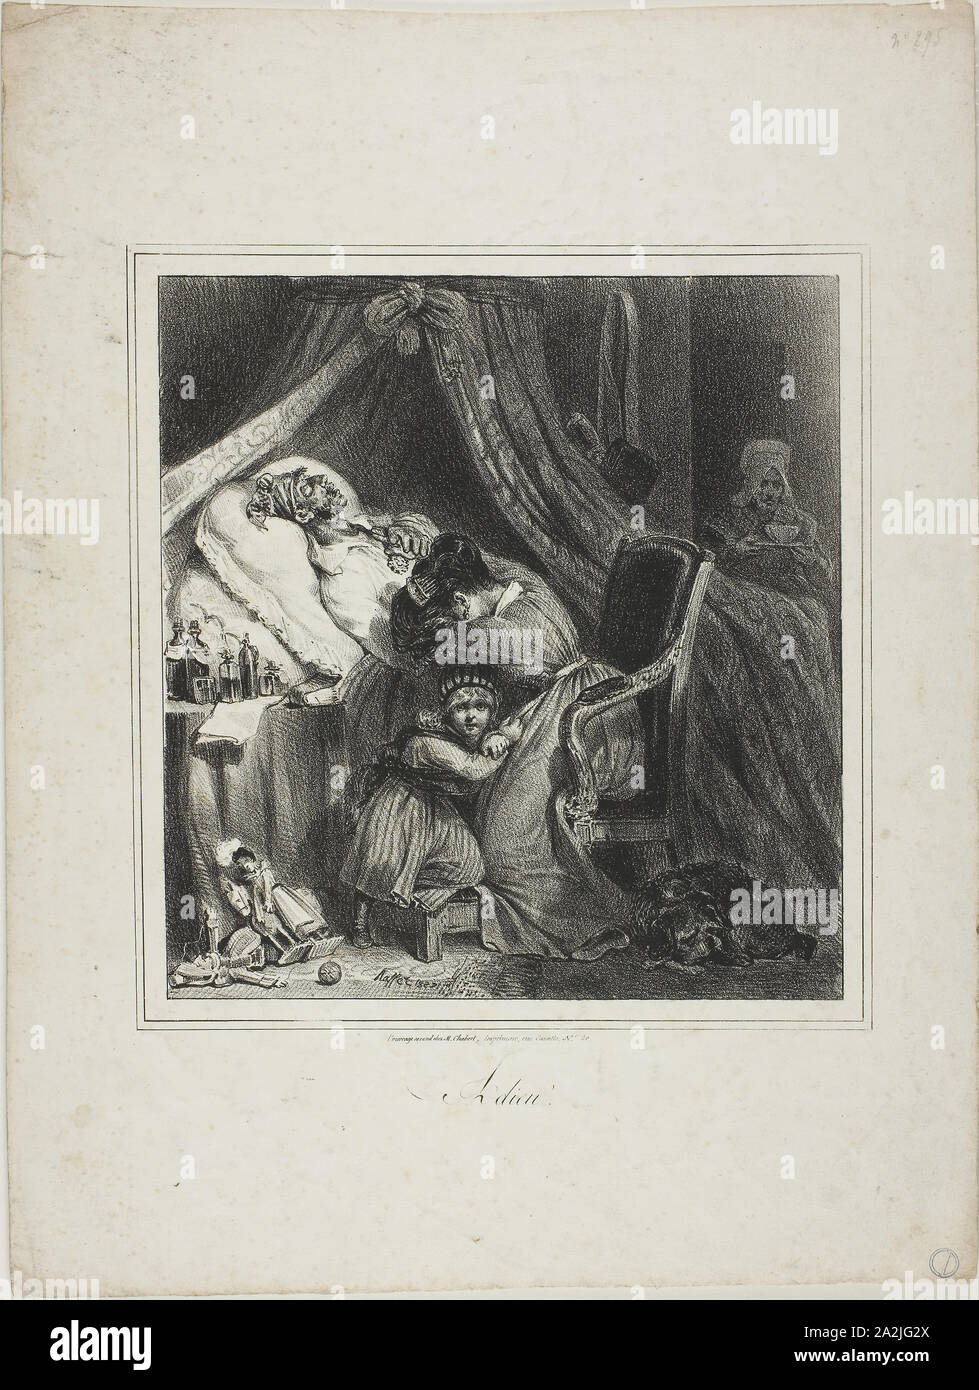 Goodbye, 1827, Denis Auguste Marie Raffet (French, 1804-1860), marketed by Chez M. Chabert (French, 19th century), France, Lithograph in black on ivory wove paper, 203 × 190 mm (image), 361 × 274 mm (sheet Stock Photo